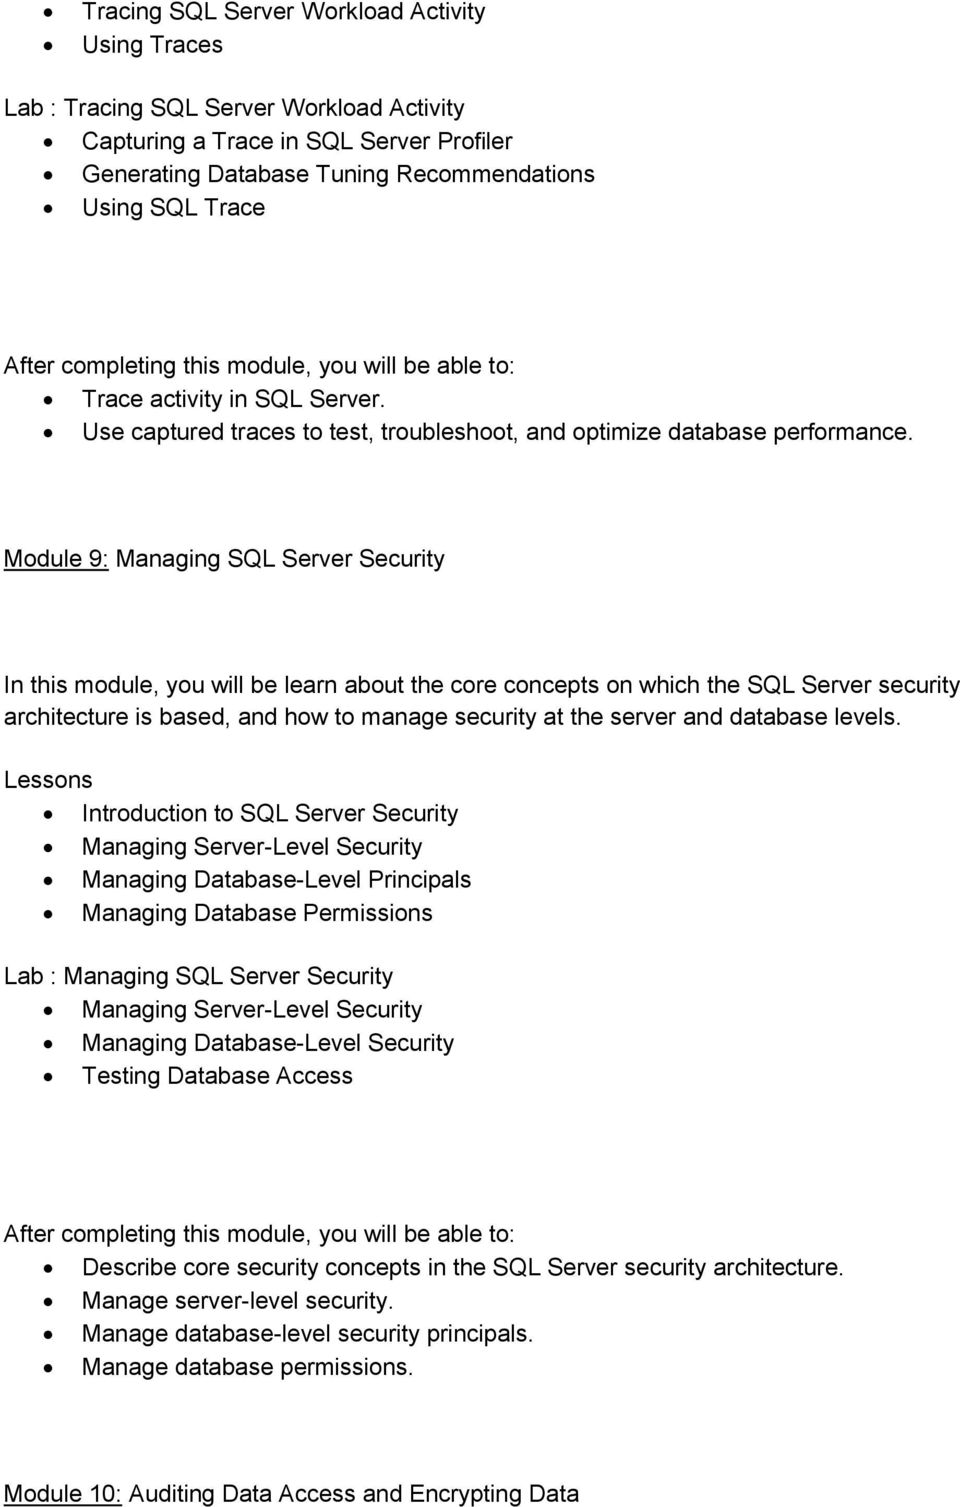 Module 9: Managing SQL Server Security In this module, you will be learn about the core concepts on which the SQL Server security architecture is based, and how to manage security at the server and